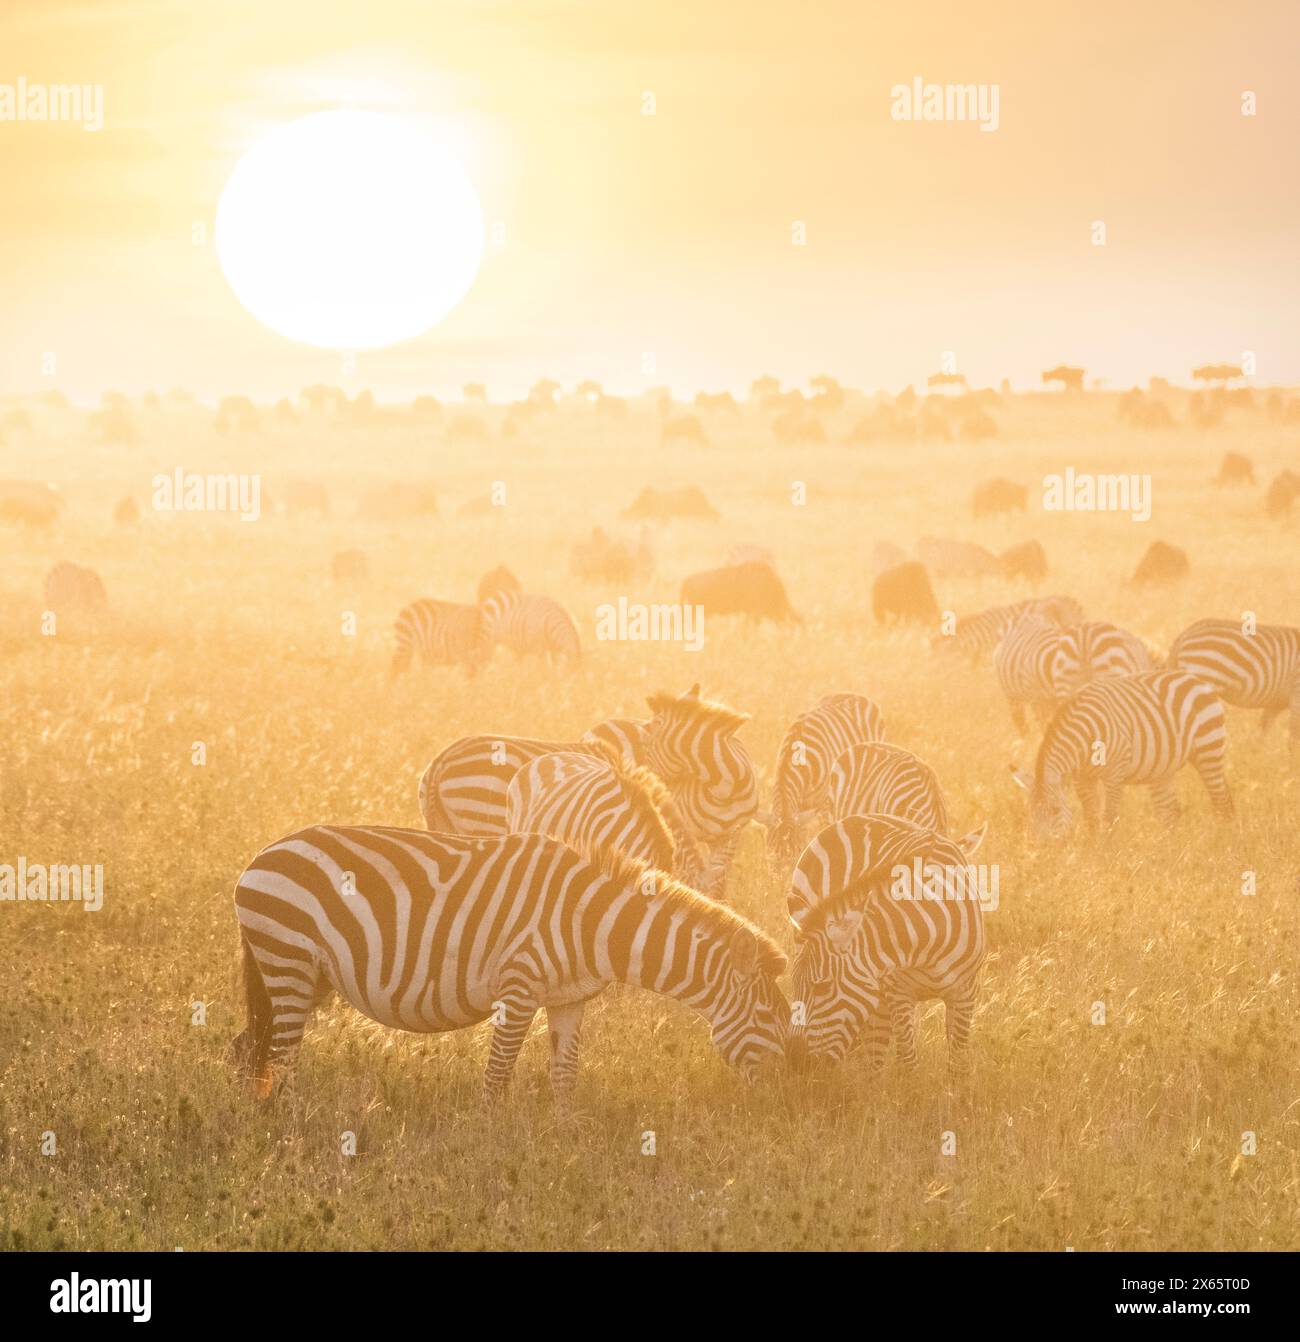 Zebra and wildebeest play against a brilliant colorful sunrise o Stock Photo